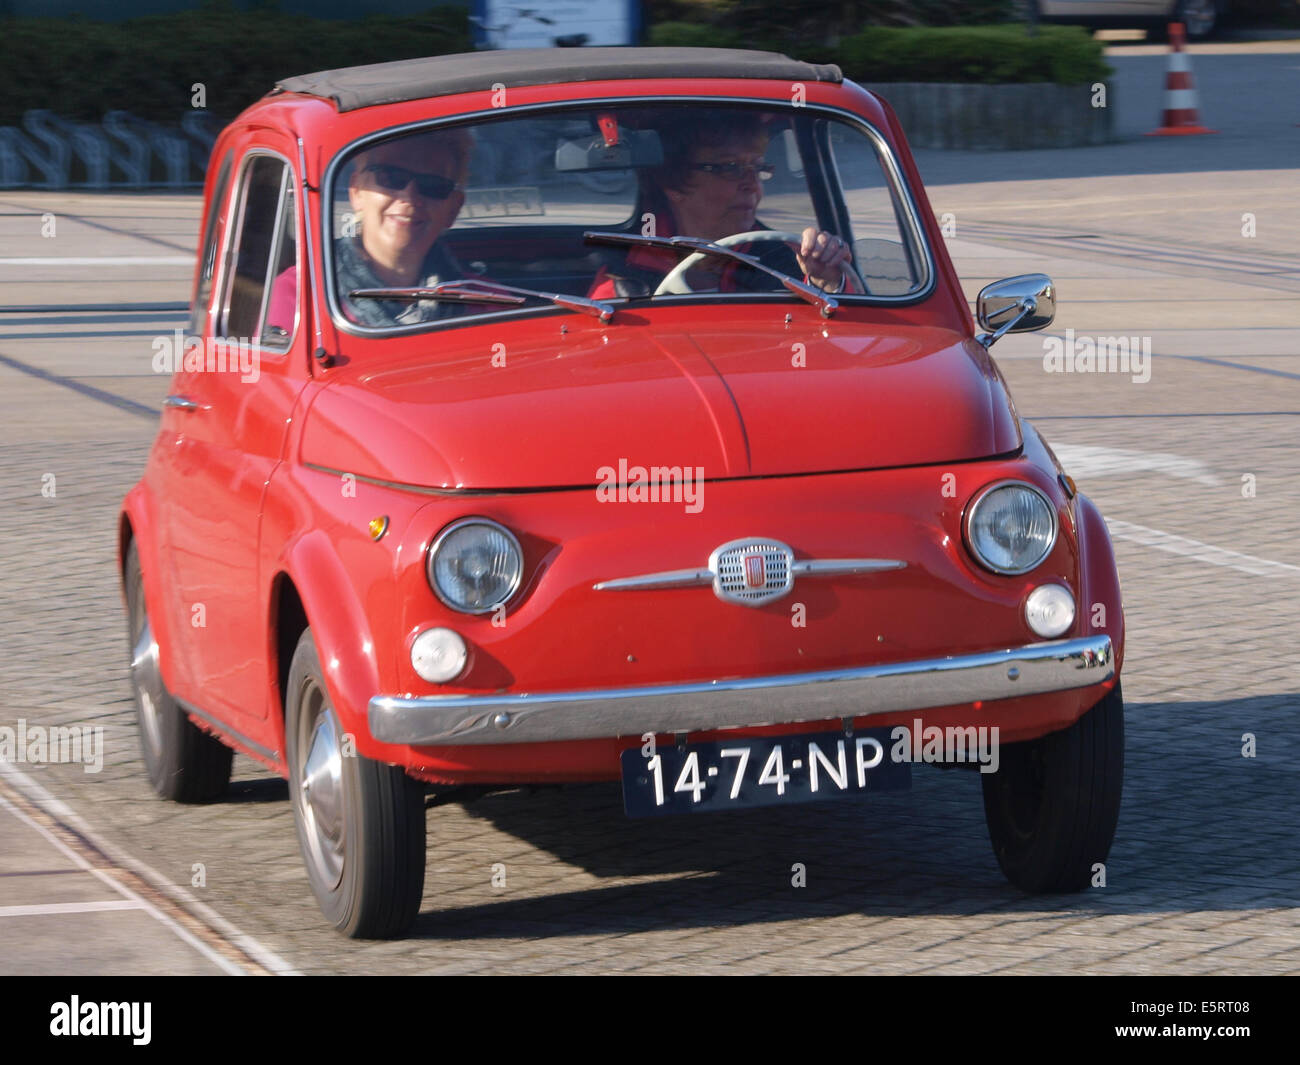 1970 Fiat , Dutch licence registration 14-74-NP, pic4 Stock Photo